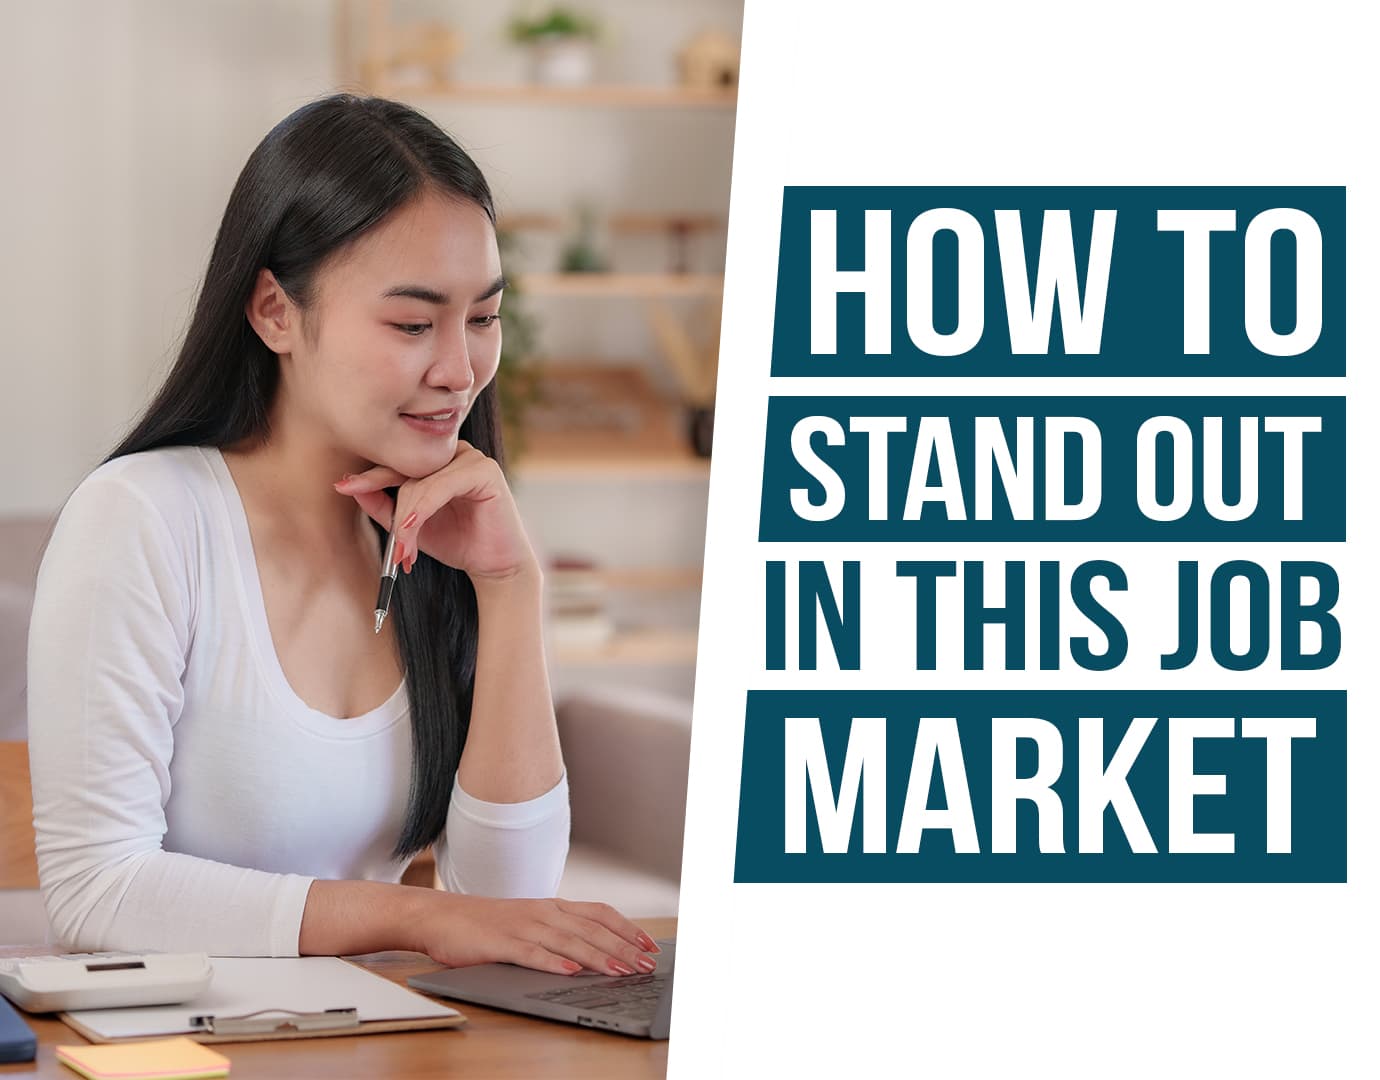 How to stand out in this job market